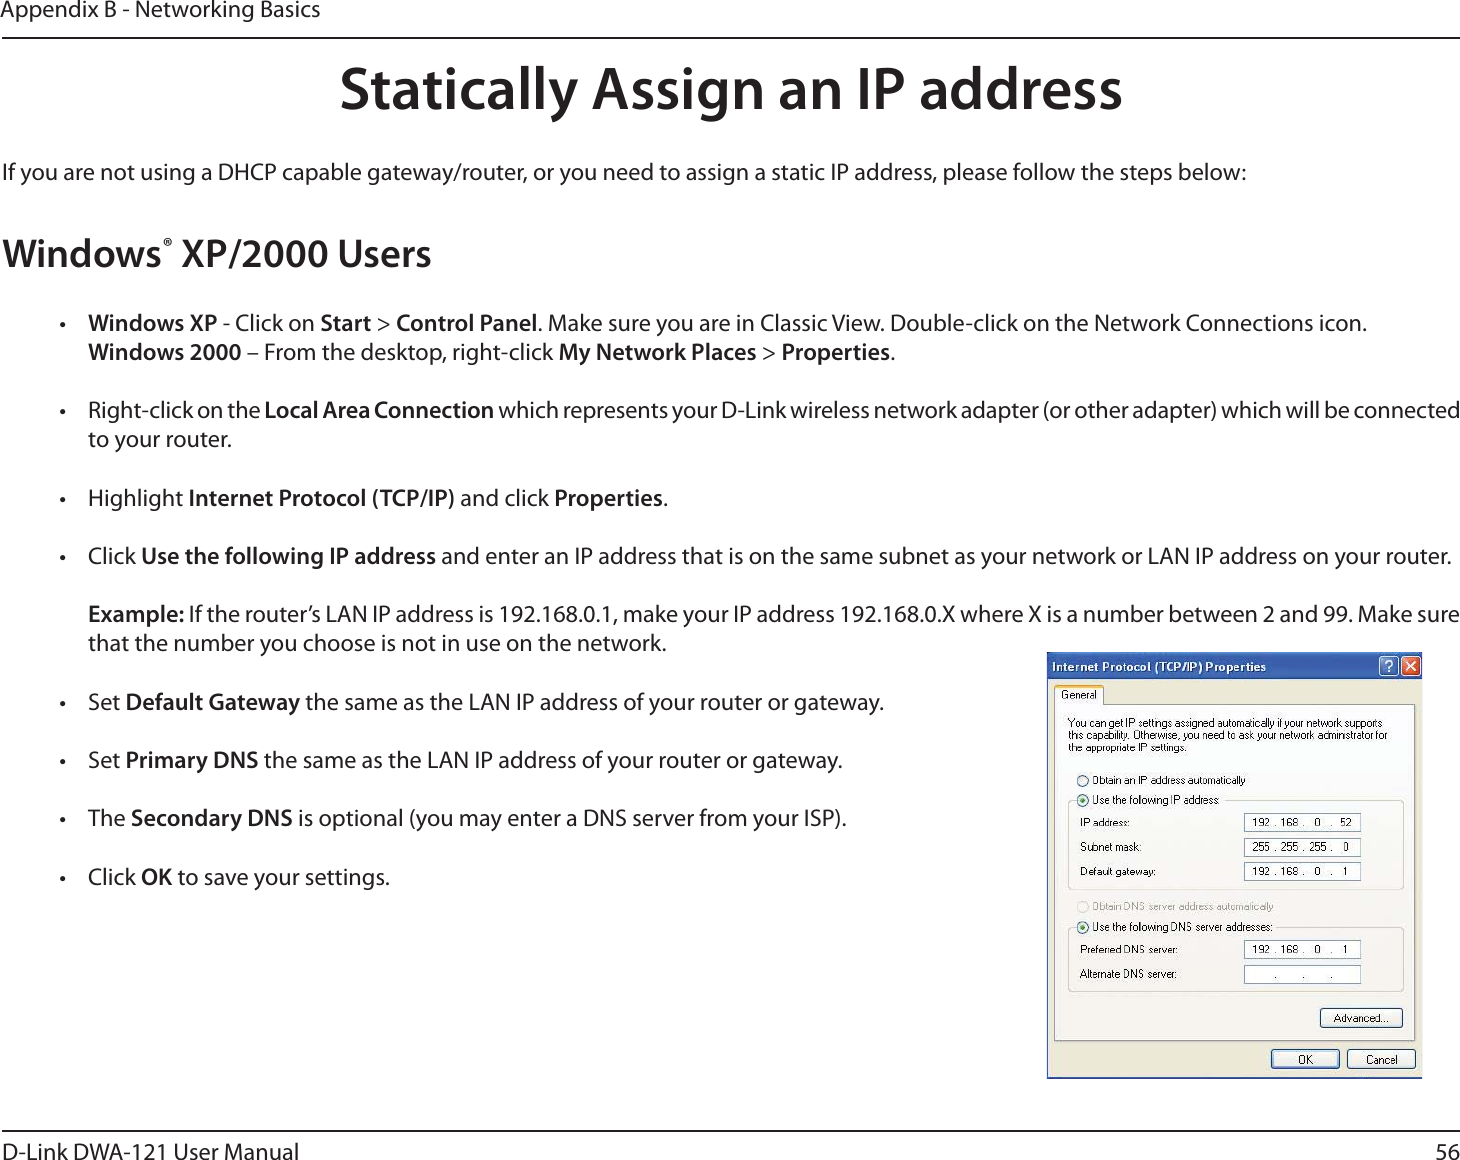 56D-Link DWA-121 User ManualAppendix B - Networking BasicsStatically Assign an IP addressIf you are not using a DHCP capable gateway/router, or you need to assign a static IP address, please follow the steps below:Windows® XP/2000 Users•  Windows XP - Click on Start &gt; Control Panel. Make sure you are in Classic View. Double-click on the Network Connections icon. Windows 2000 – From the desktop, right-click My Network Places &gt; Properties.•  Right-click on the Local Area Connection which represents your D-Link wireless network adapter (or other adapter) which will be connected to your router.• Highlight Internet Protocol (TCP/IP) and click Properties.• Click Use the following IP address and enter an IP address that is on the same subnet as your network or LAN IP address on your router. Example: If the router’s LAN IP address is 192.168.0.1, make your IP address 192.168.0.X where X is a number between 2 and 99. Make sure that the number you choose is not in use on the network. • Set Default Gateway the same as the LAN IP address of your router or gateway.• Set Primary DNS the same as the LAN IP address of your router or gateway. • The Secondary DNS is optional (you may enter a DNS server from your ISP).• Click OK to save your settings.